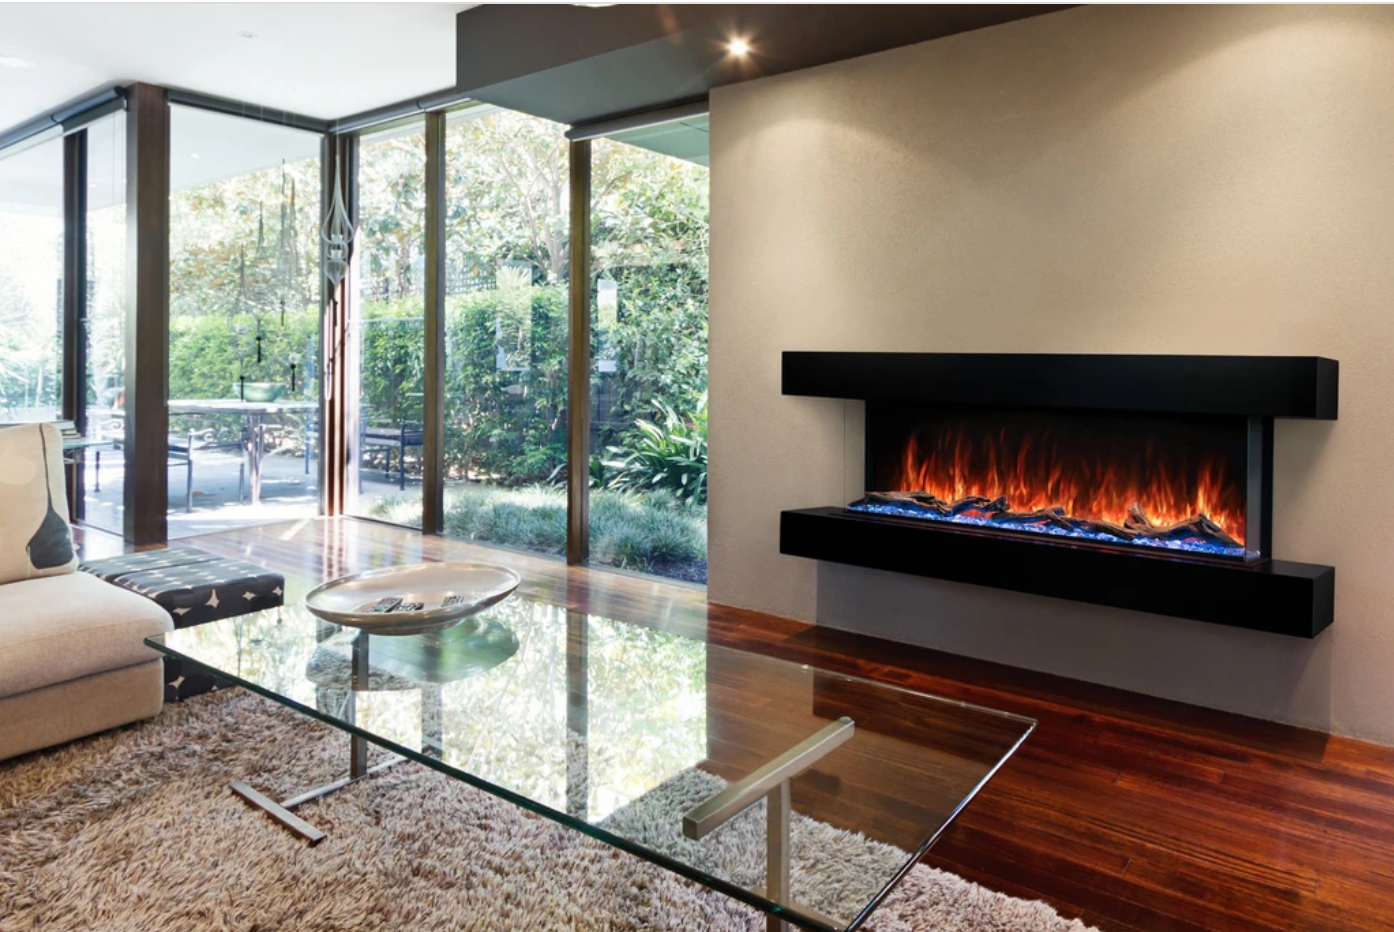 Modern Flames Landscape Pro 94'' Electric Fireplace Wall Mounted Suite